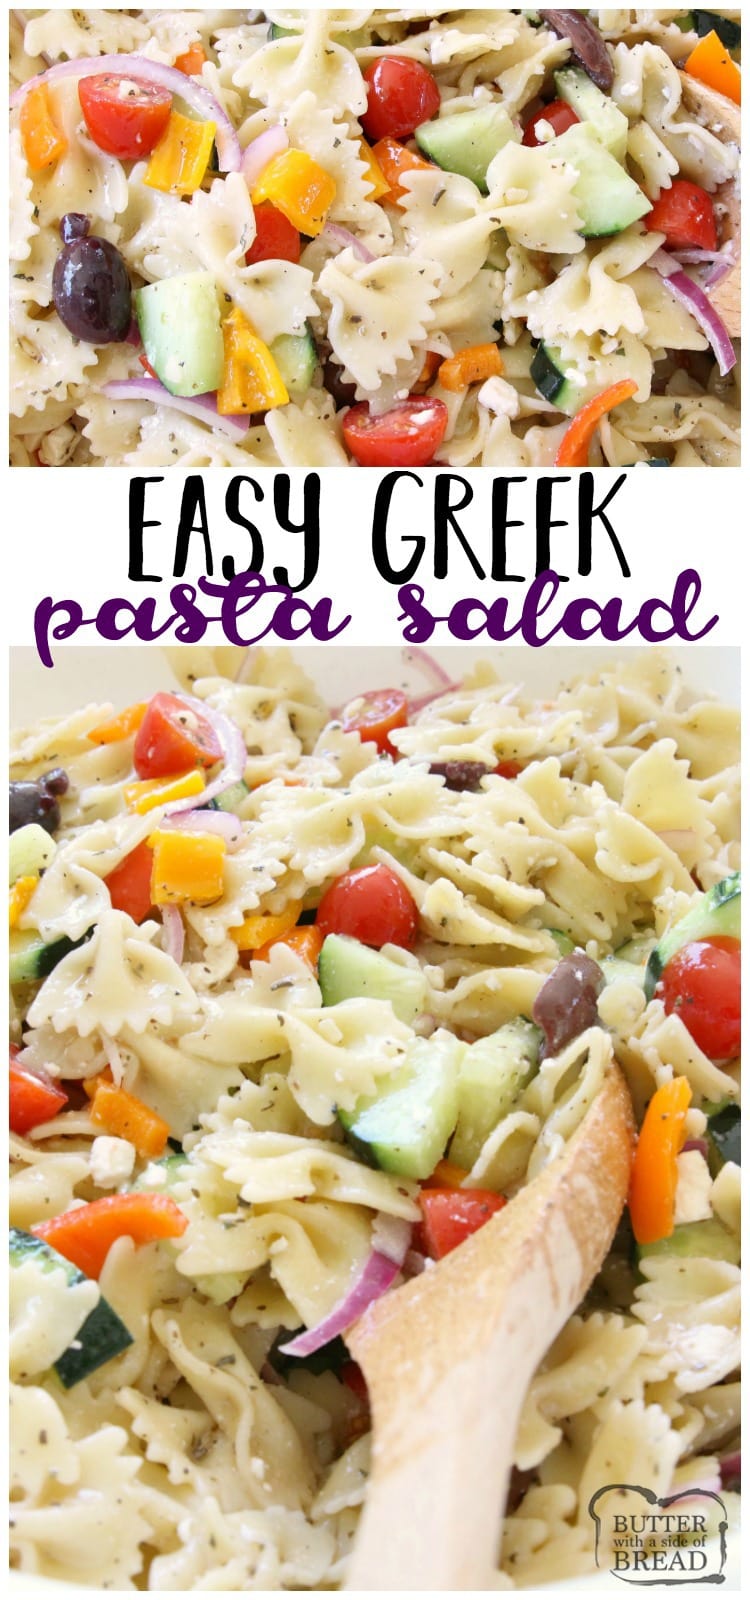 Greek Pasta Salad is fresh, flavorful and simple to put together. It's the perfect side dish! Loaded with vegetables and drizzled with a homemade lemon greek vinaigrette, it's easy to make and everyone enjoys it. Perfect topped with crumbled feta cheese and a few additional olives.